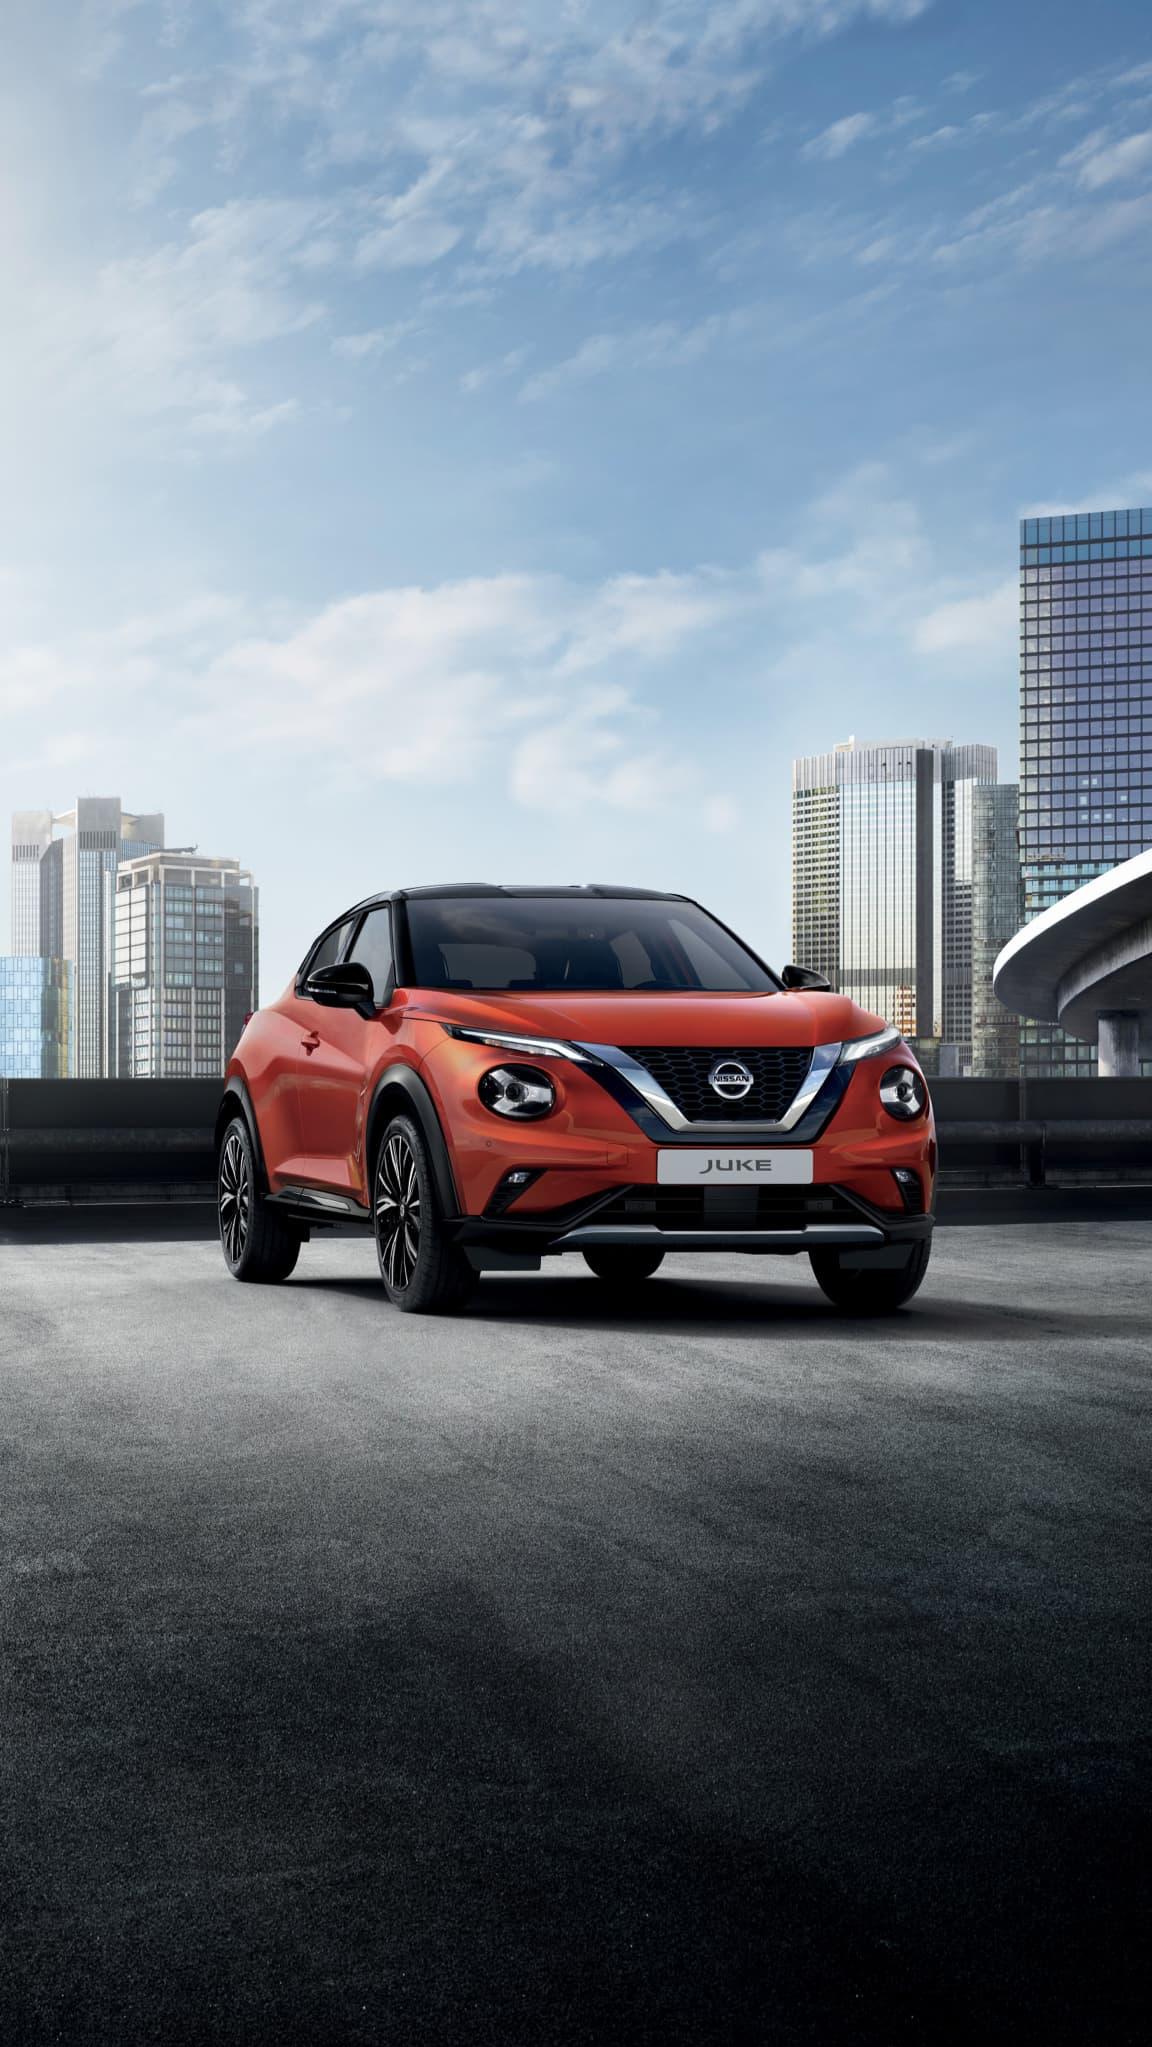 New Nissan Juke Small Suv Crossover Coup